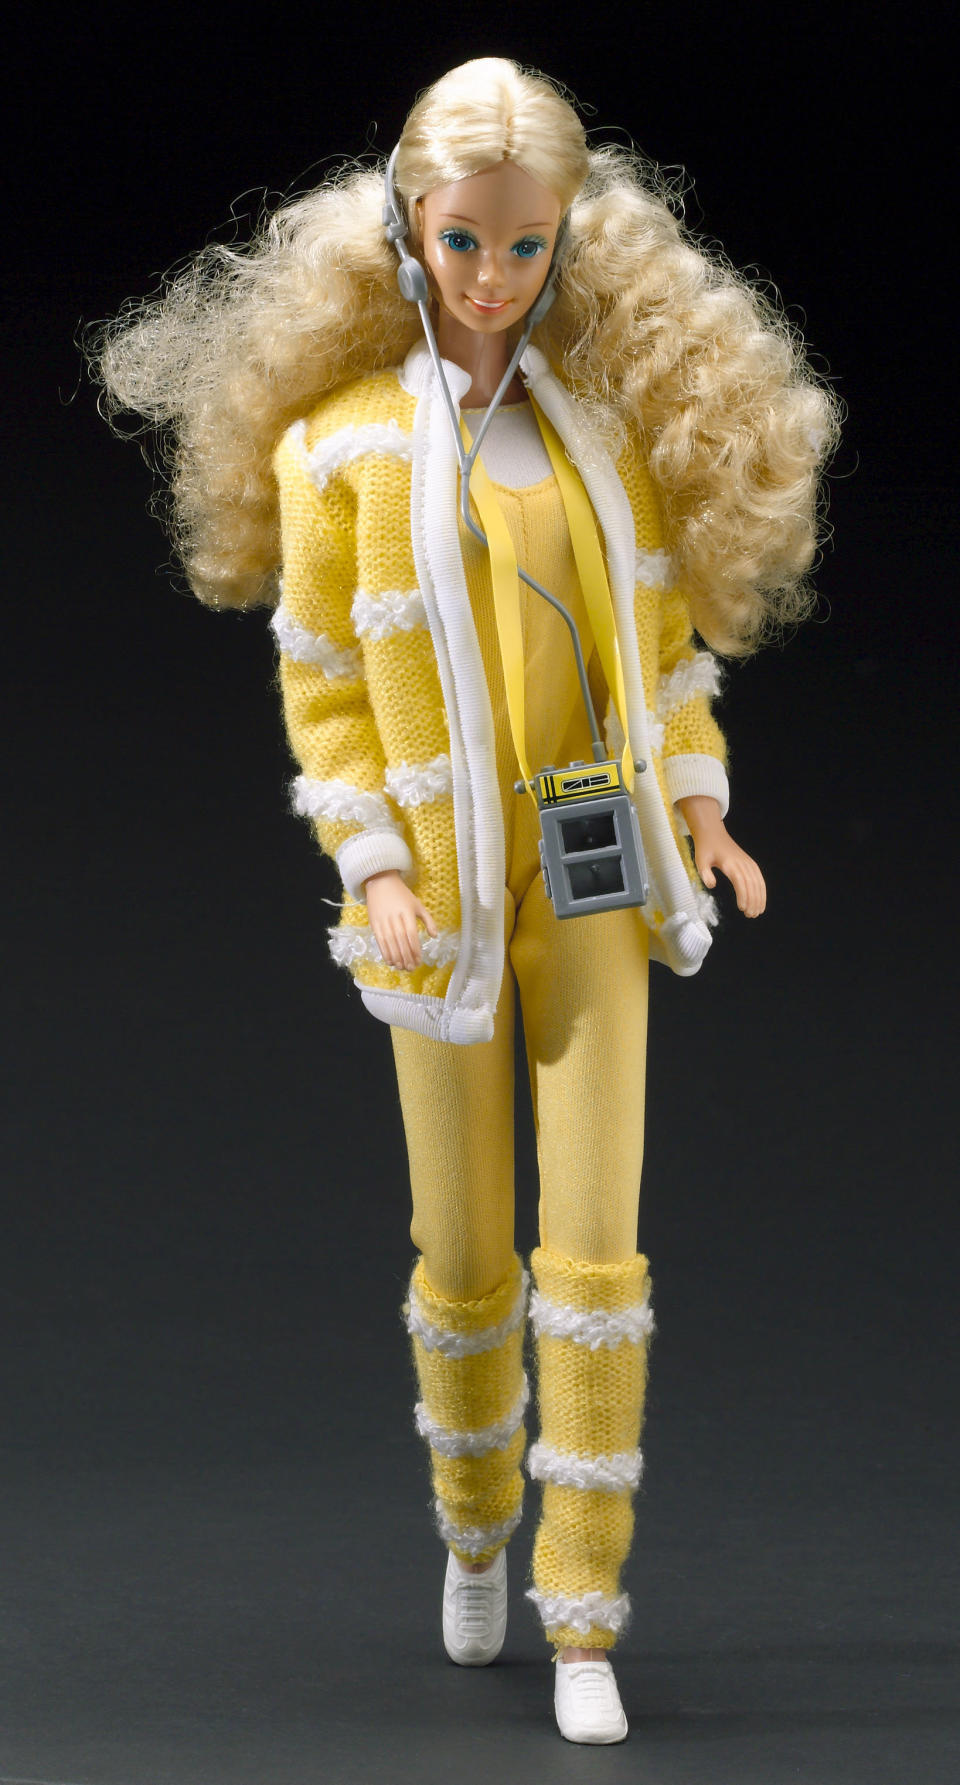 A photo of Sport Walkman Barbie from the 1980s.